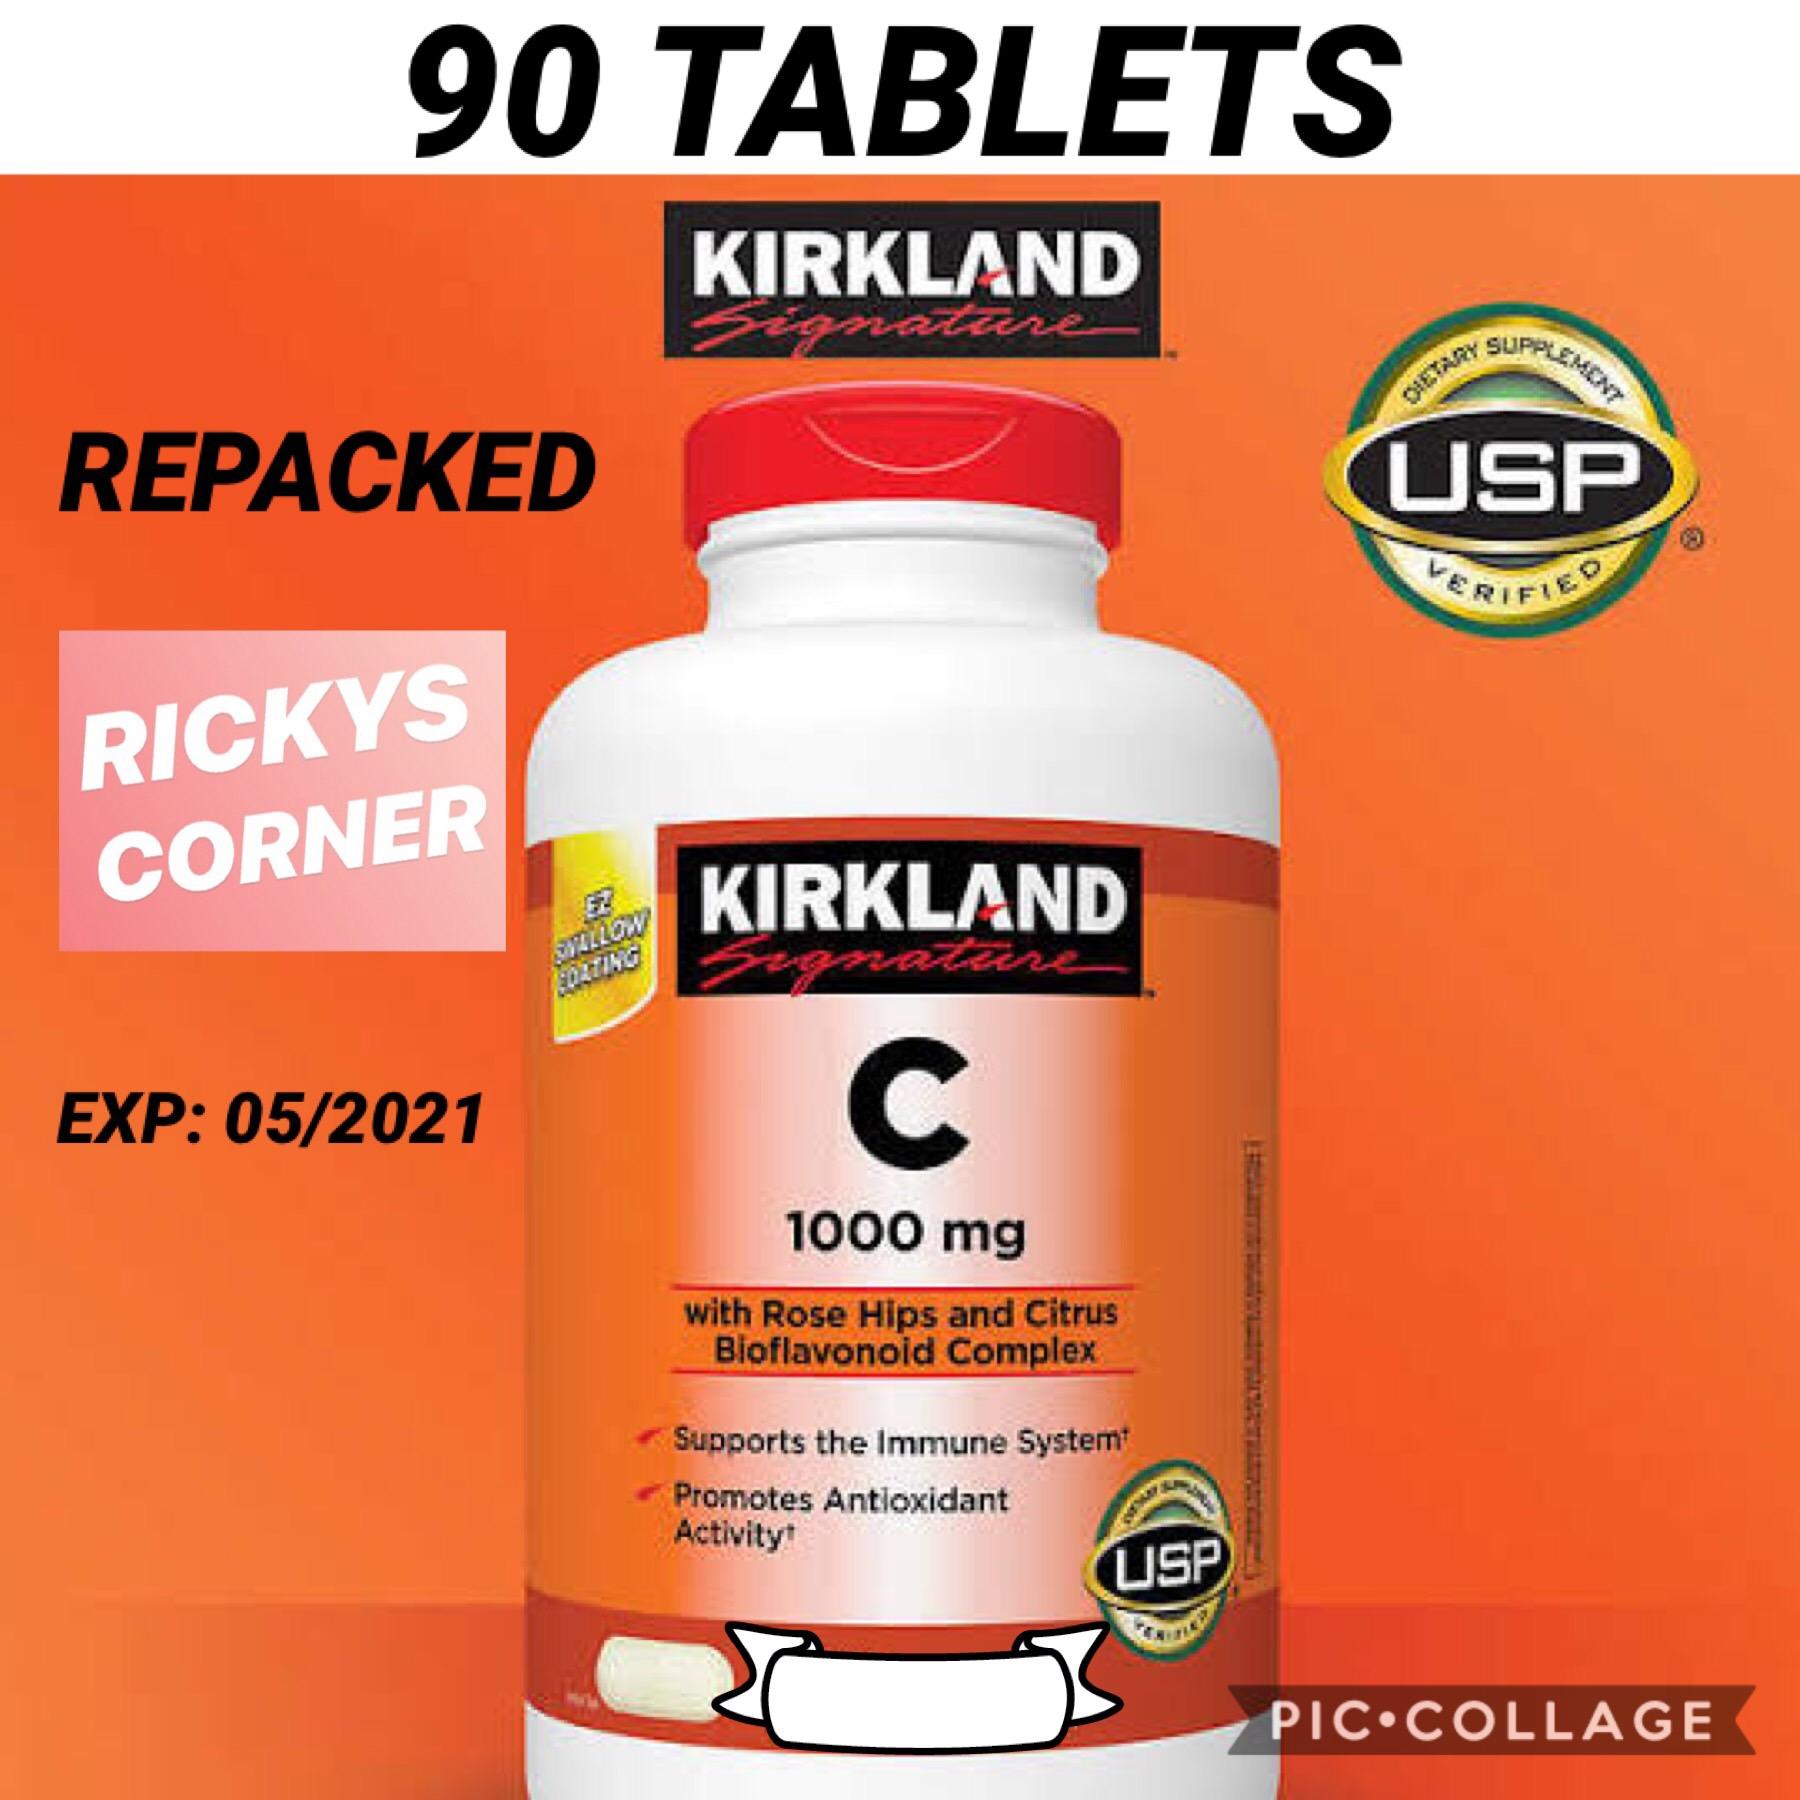 Kirkland Vitamin C 1000 Mg 90 Tablets Repacked Review And Price